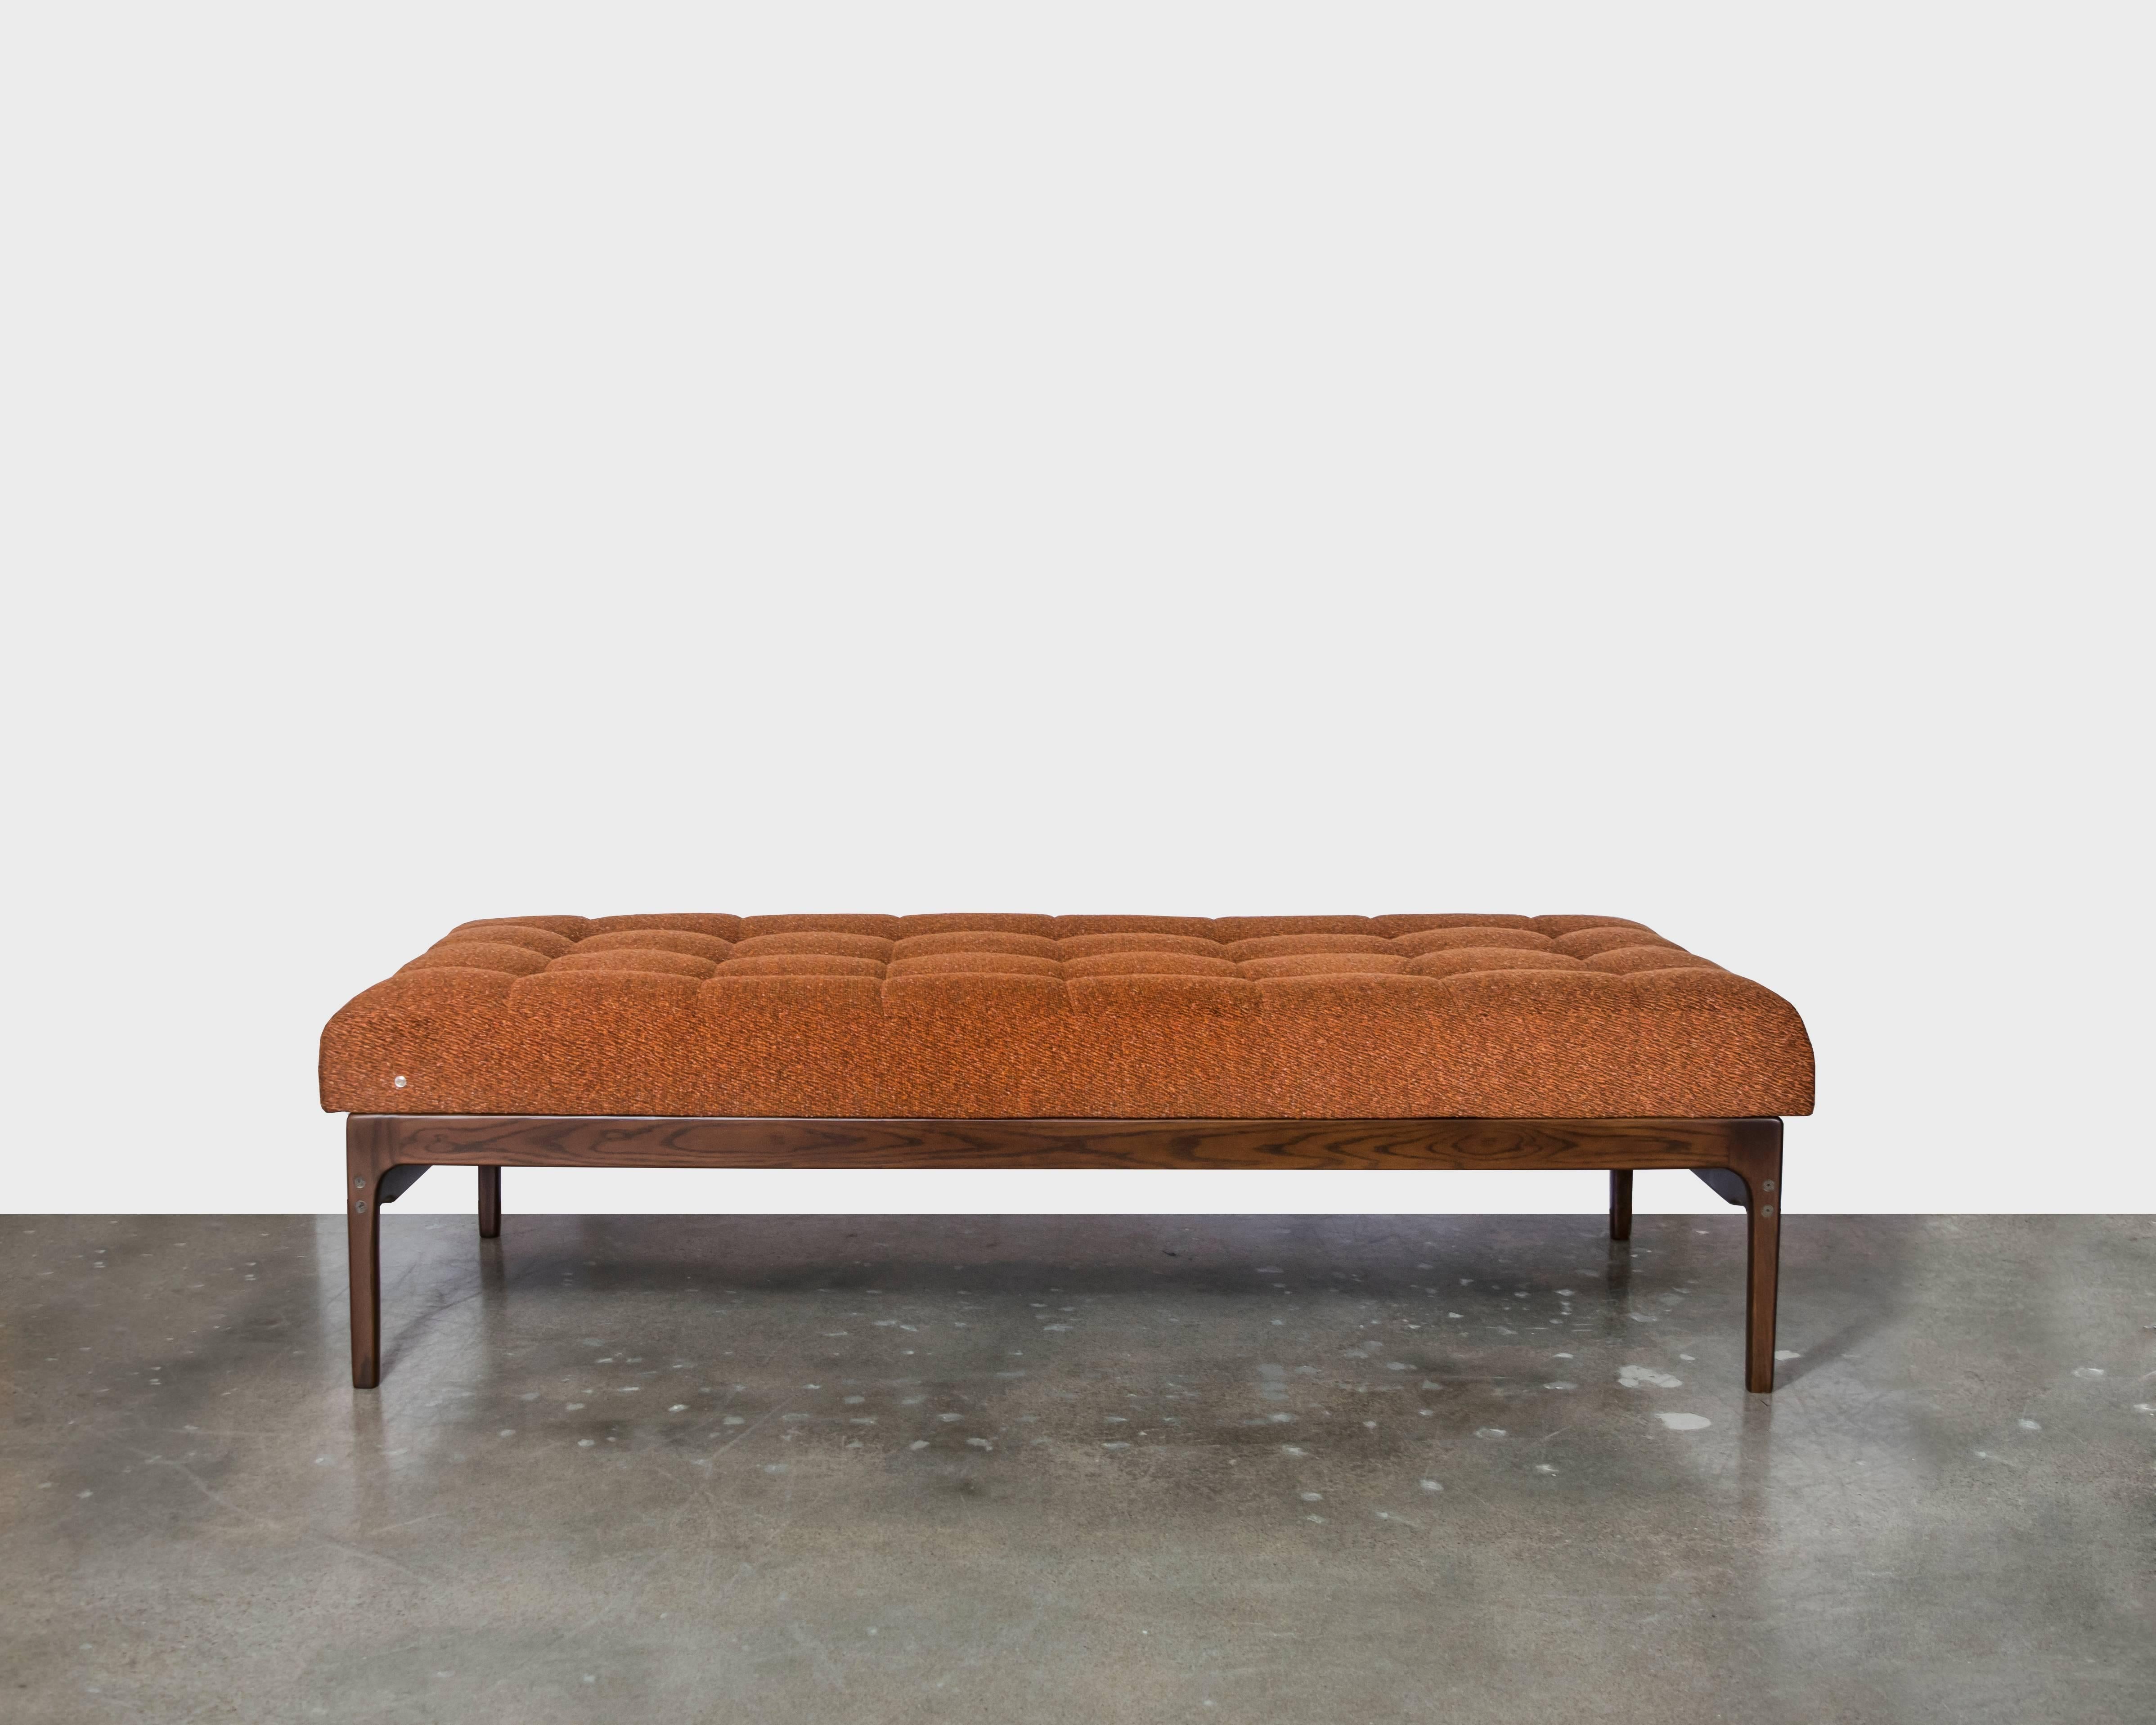 American Tufted Bench with Wood Base in the Style of the Barcelona Daybed